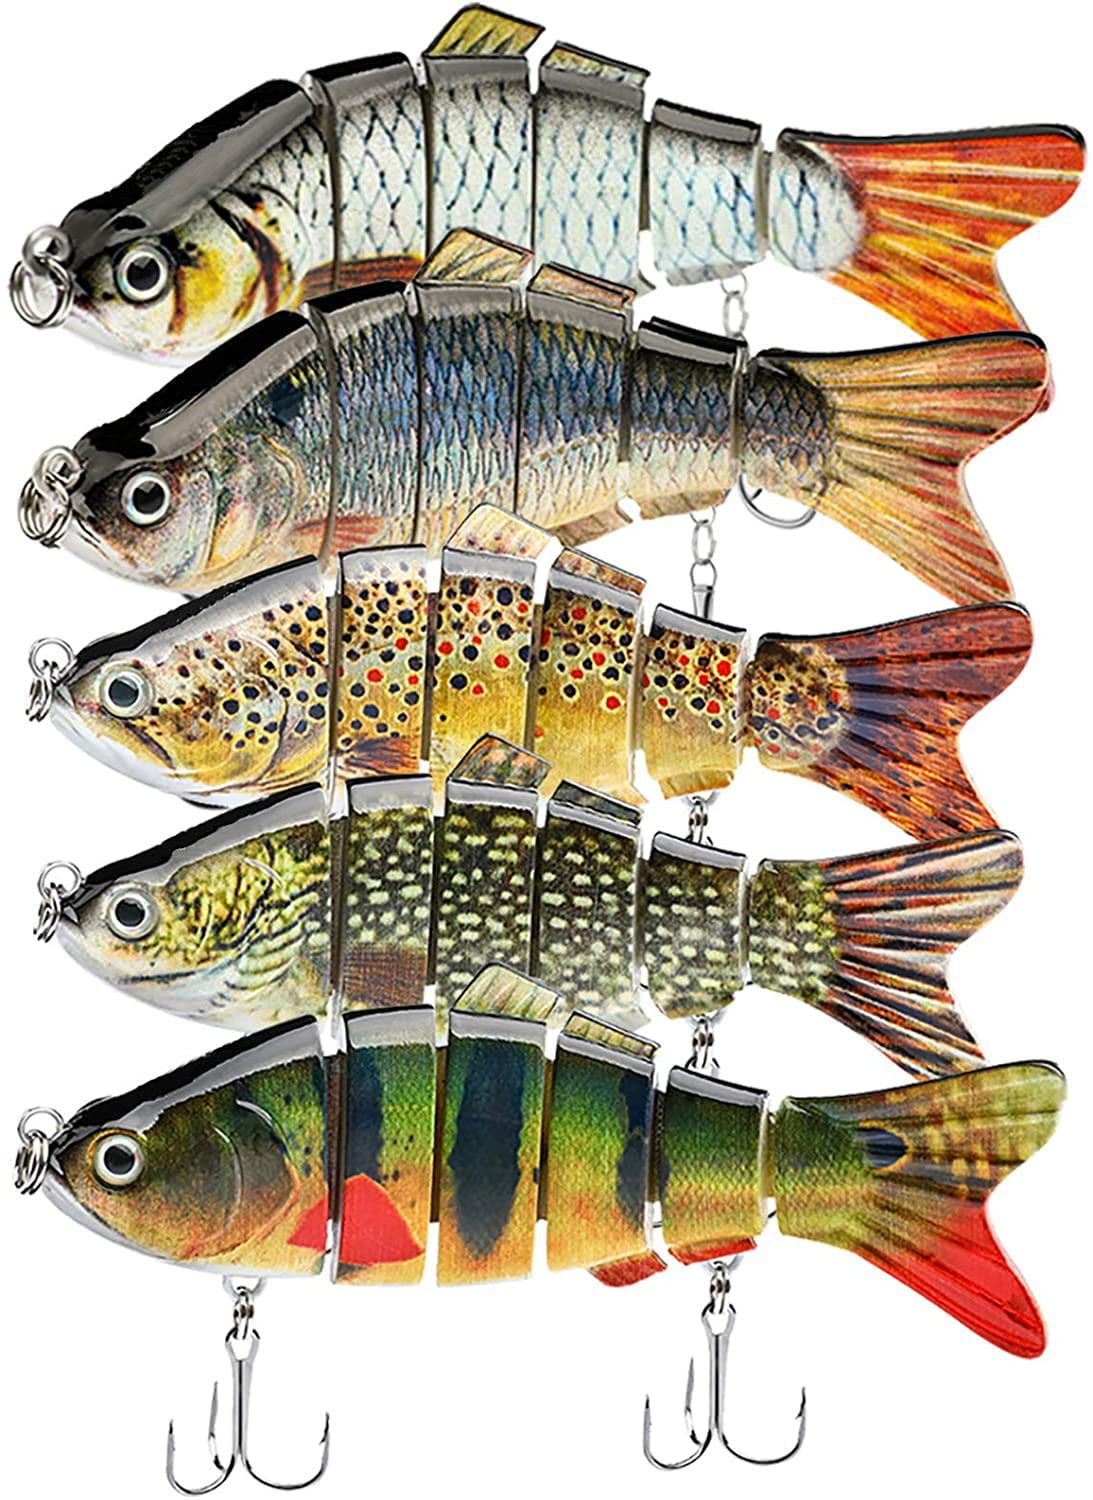 5Pcs/Set Bionic Swimming Lure Suitable For All Kinds Of Jointed Bait Multi Fish 